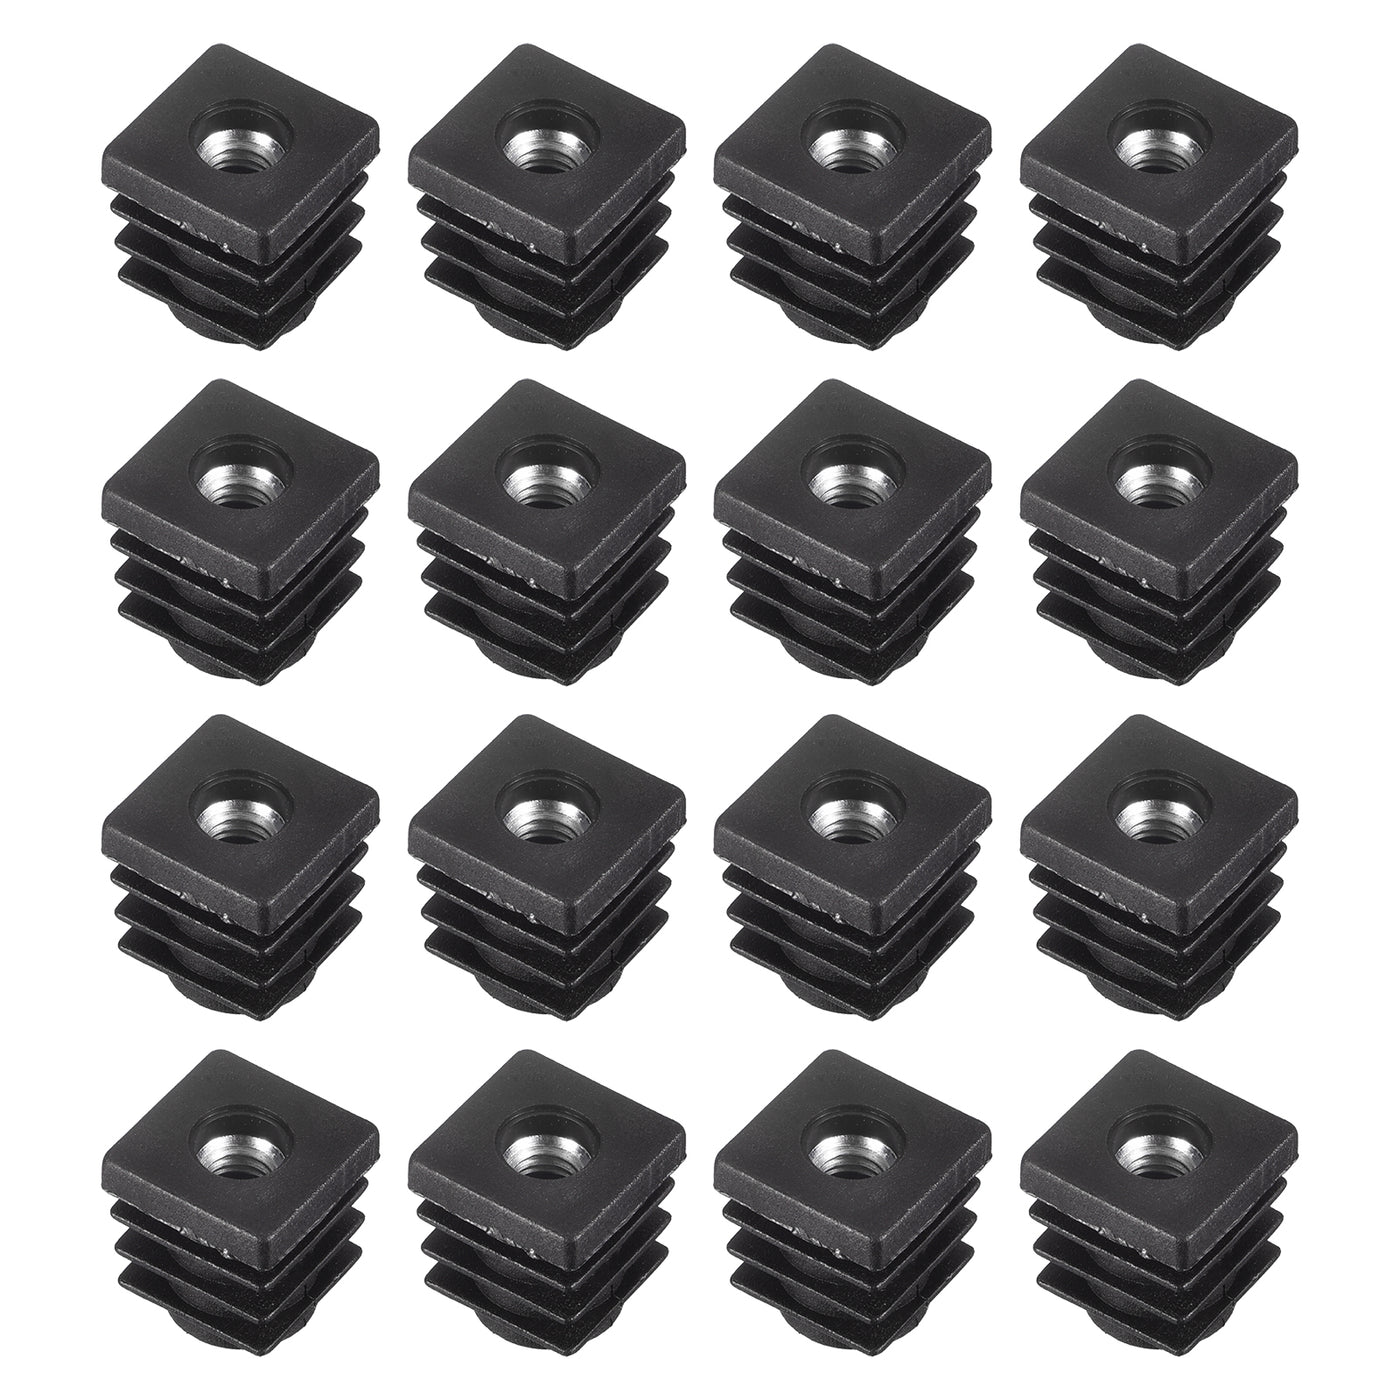 uxcell Uxcell 16Pcs 0.59"x0.59" Caster Insert with Thread, Square M6 Thread for Furniture